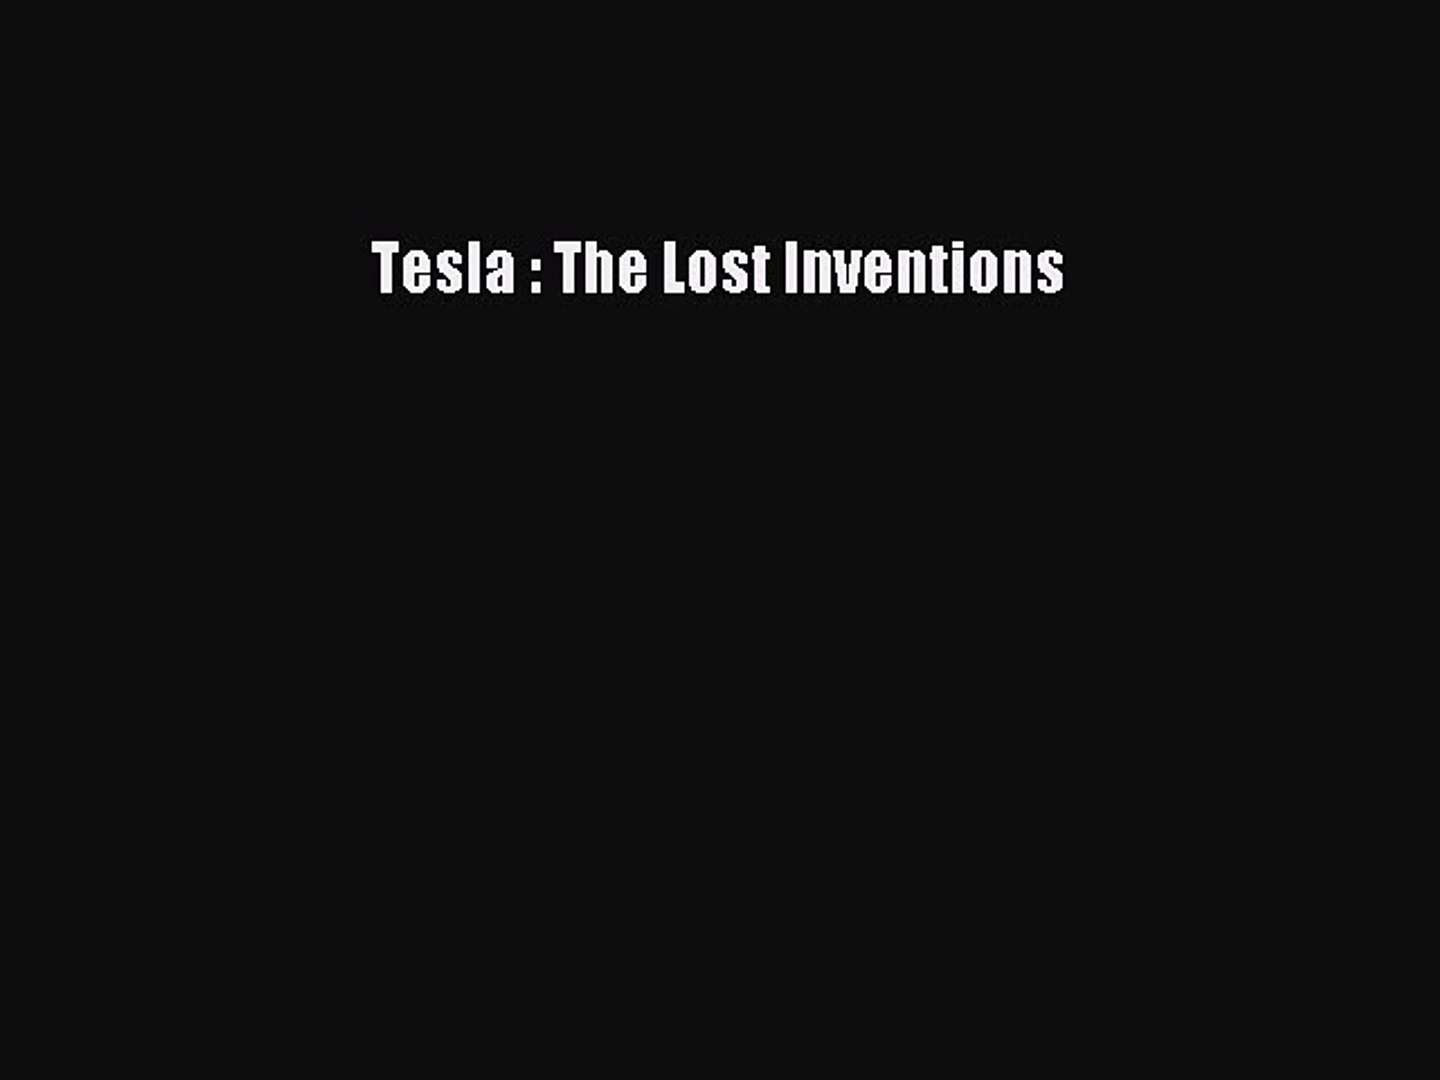 Pdf Tesla The Lost Inventions Ebook